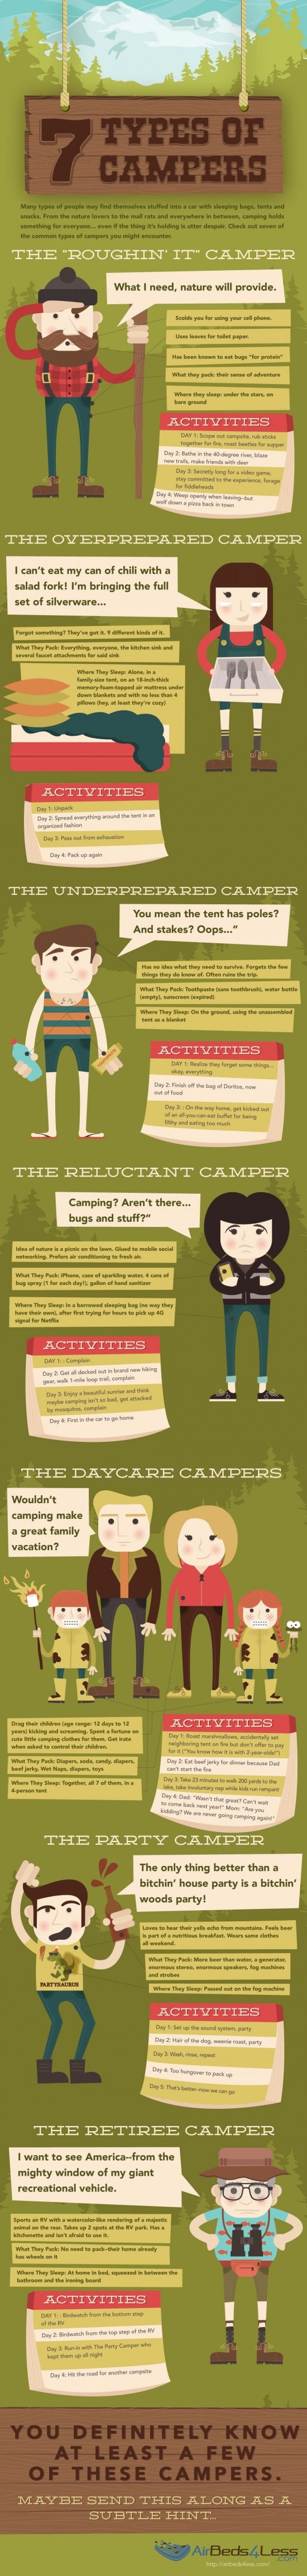 Seven different ways and types of campers